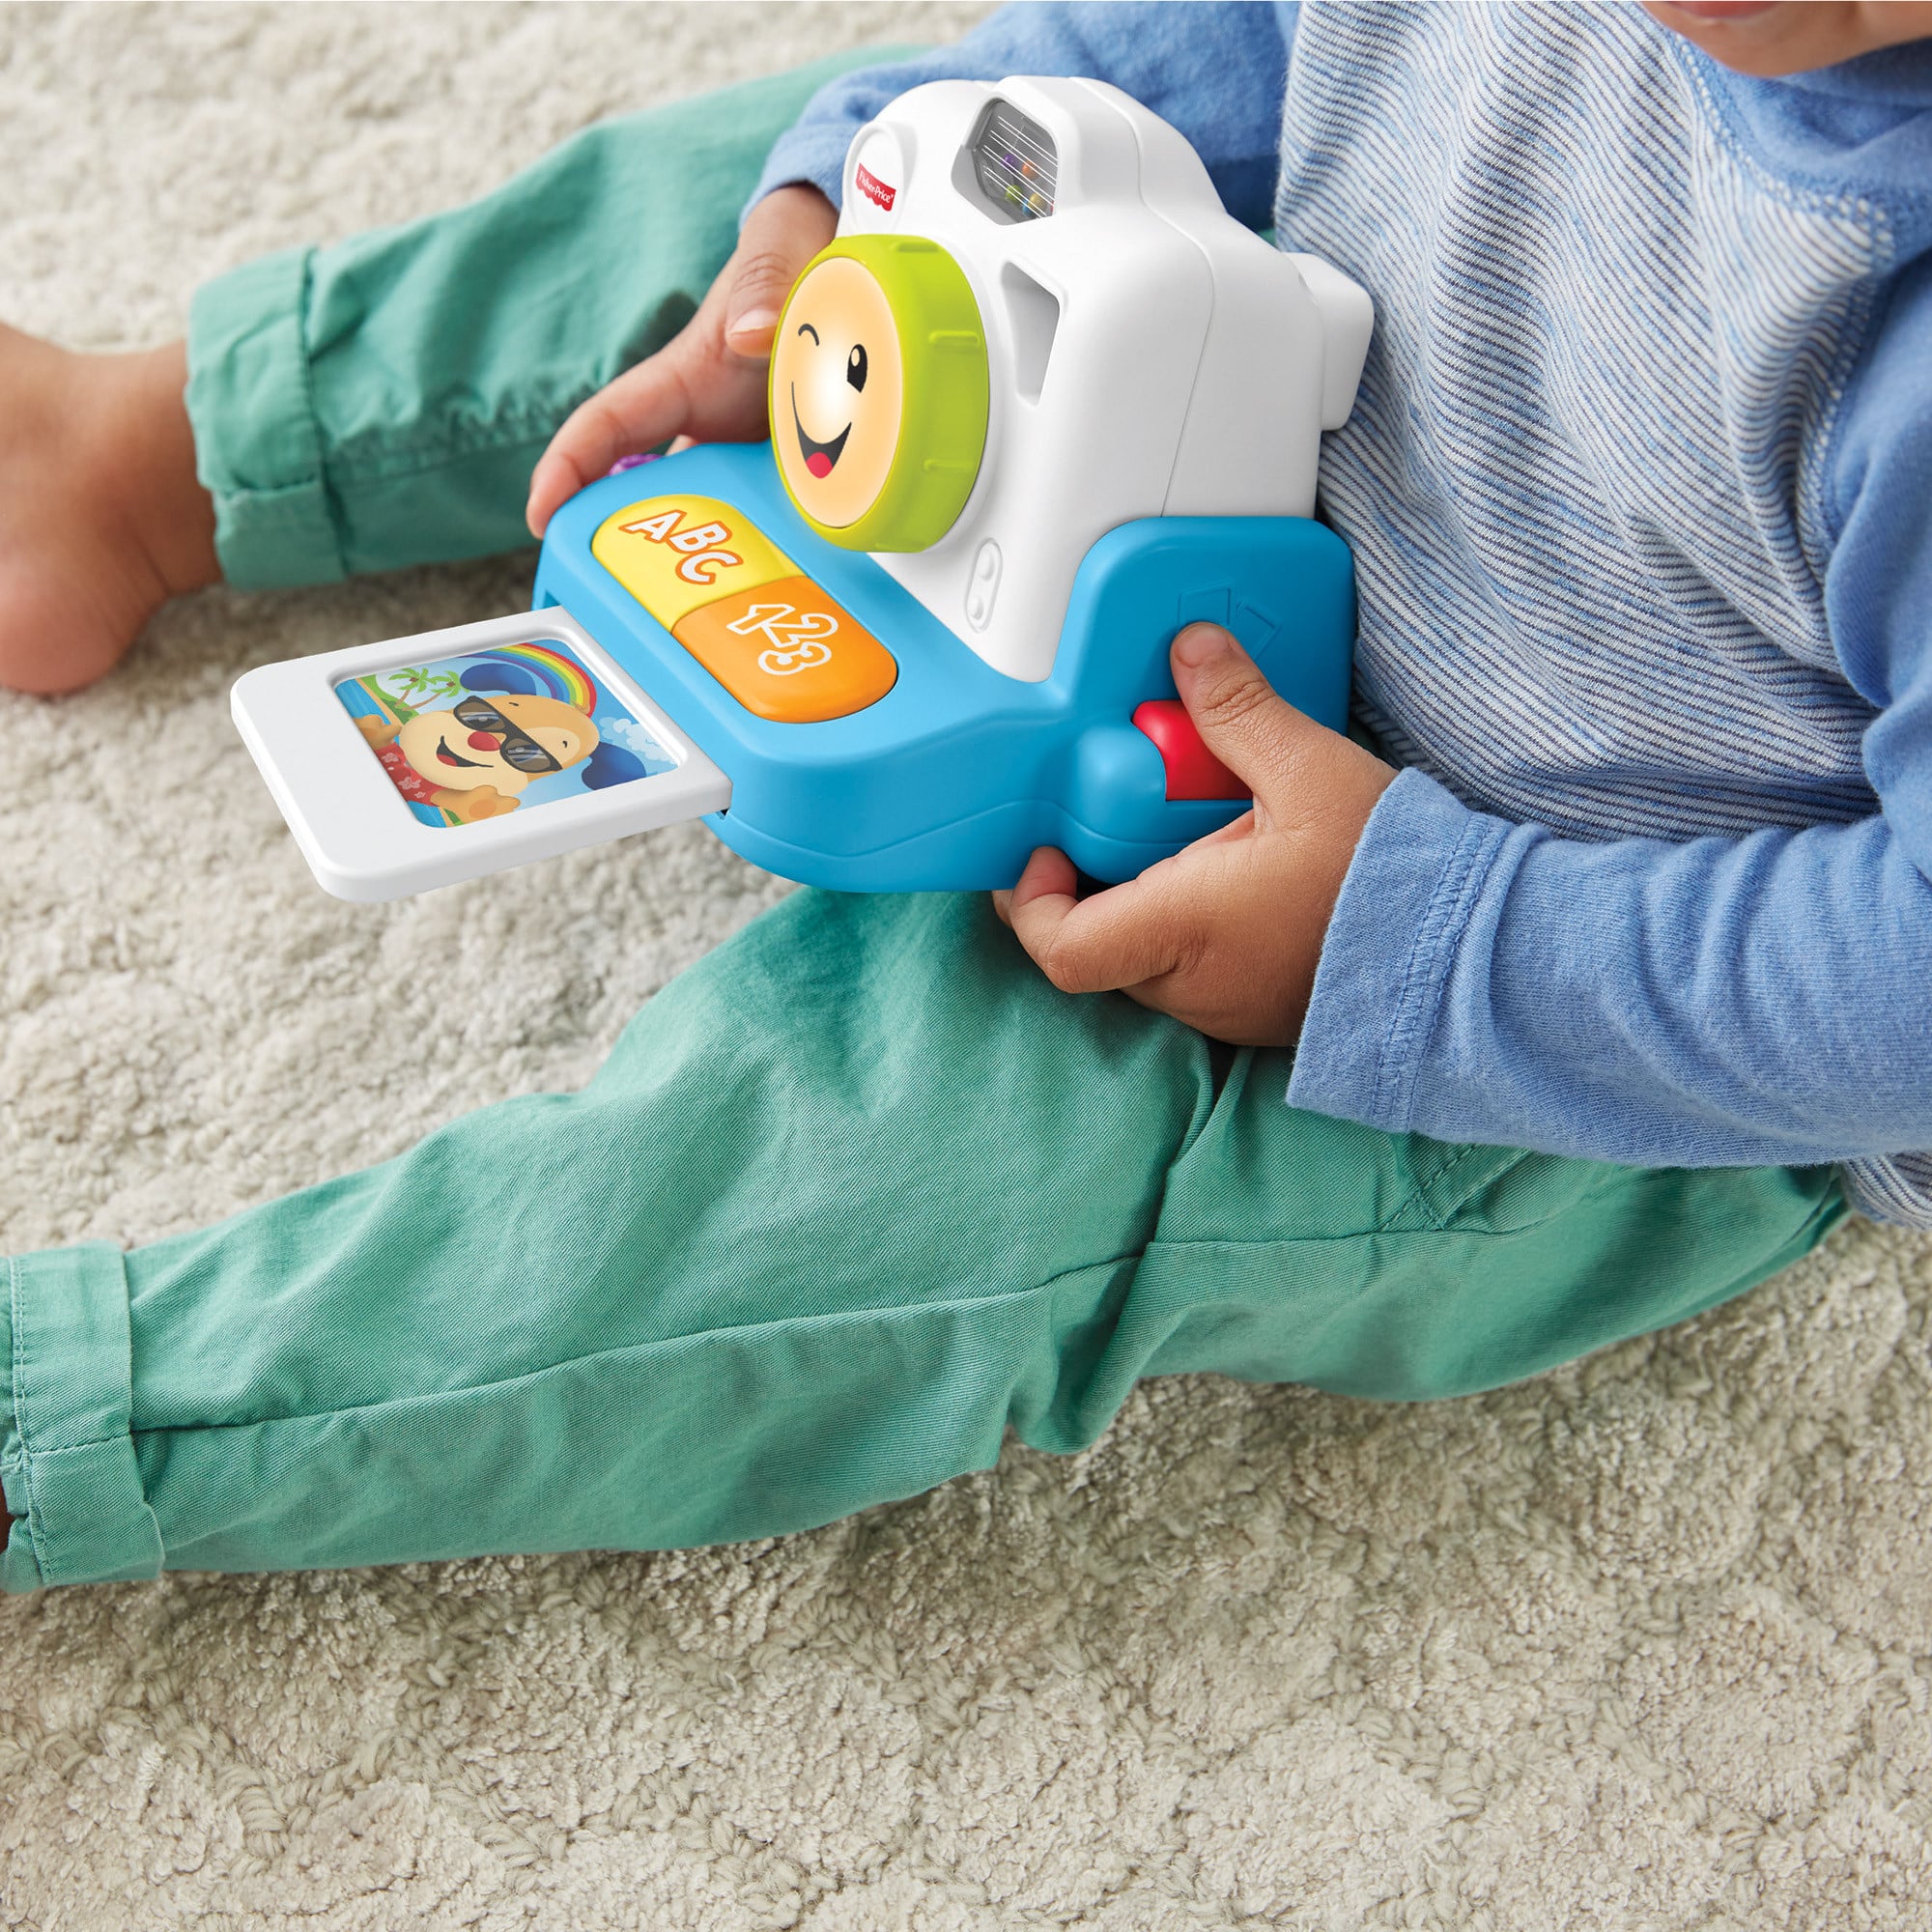 Fisher Price - Laugh & Learn - Click & Learn Instant Camera